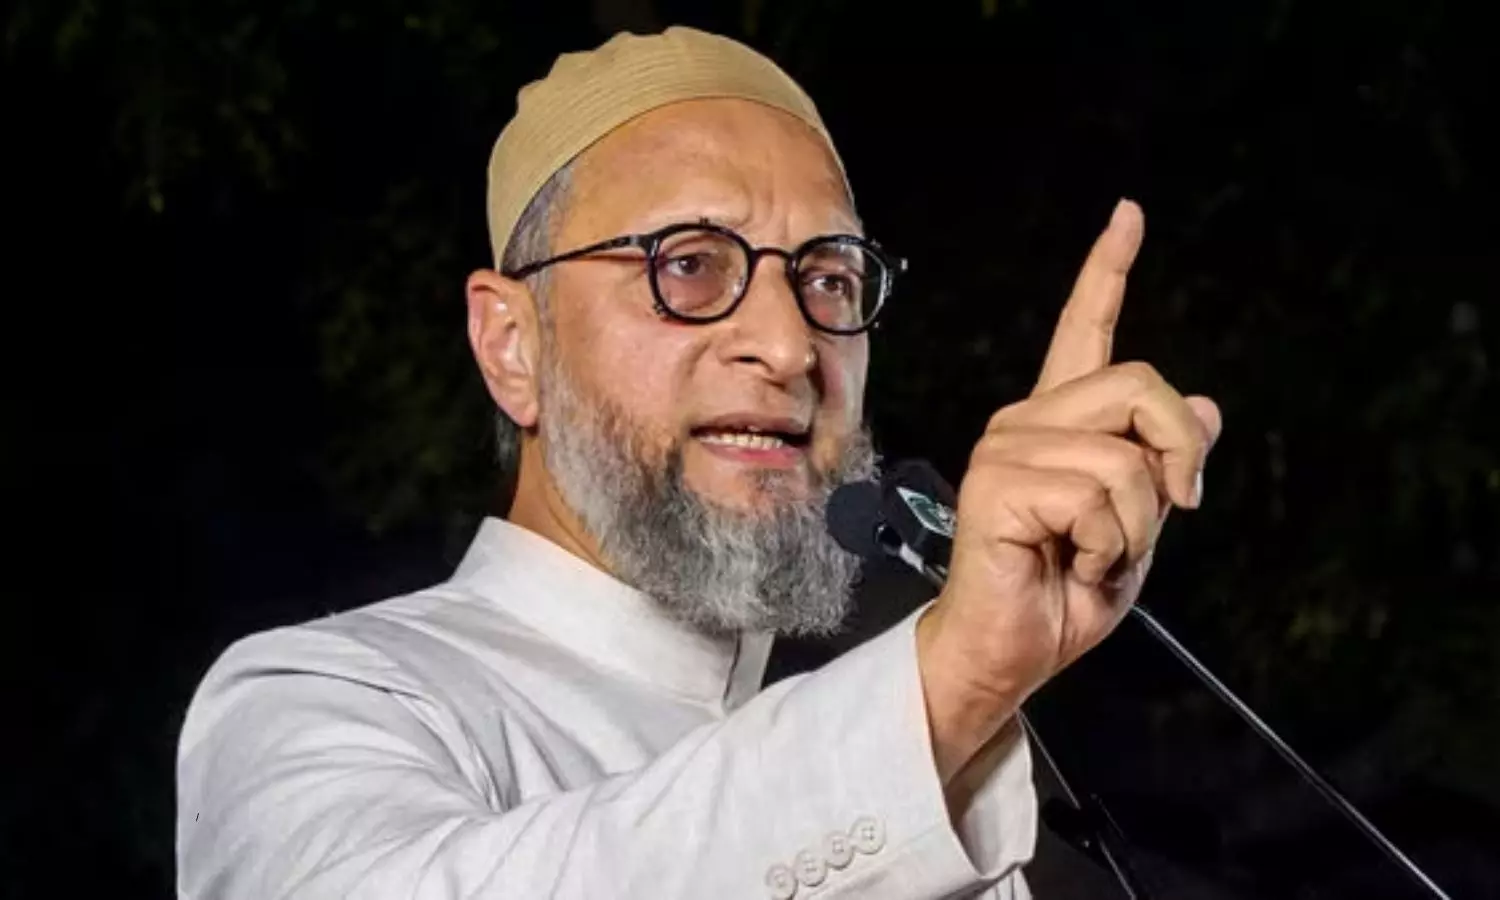 The police have registered a case against the attack on MP Asaduddin Owaisi house